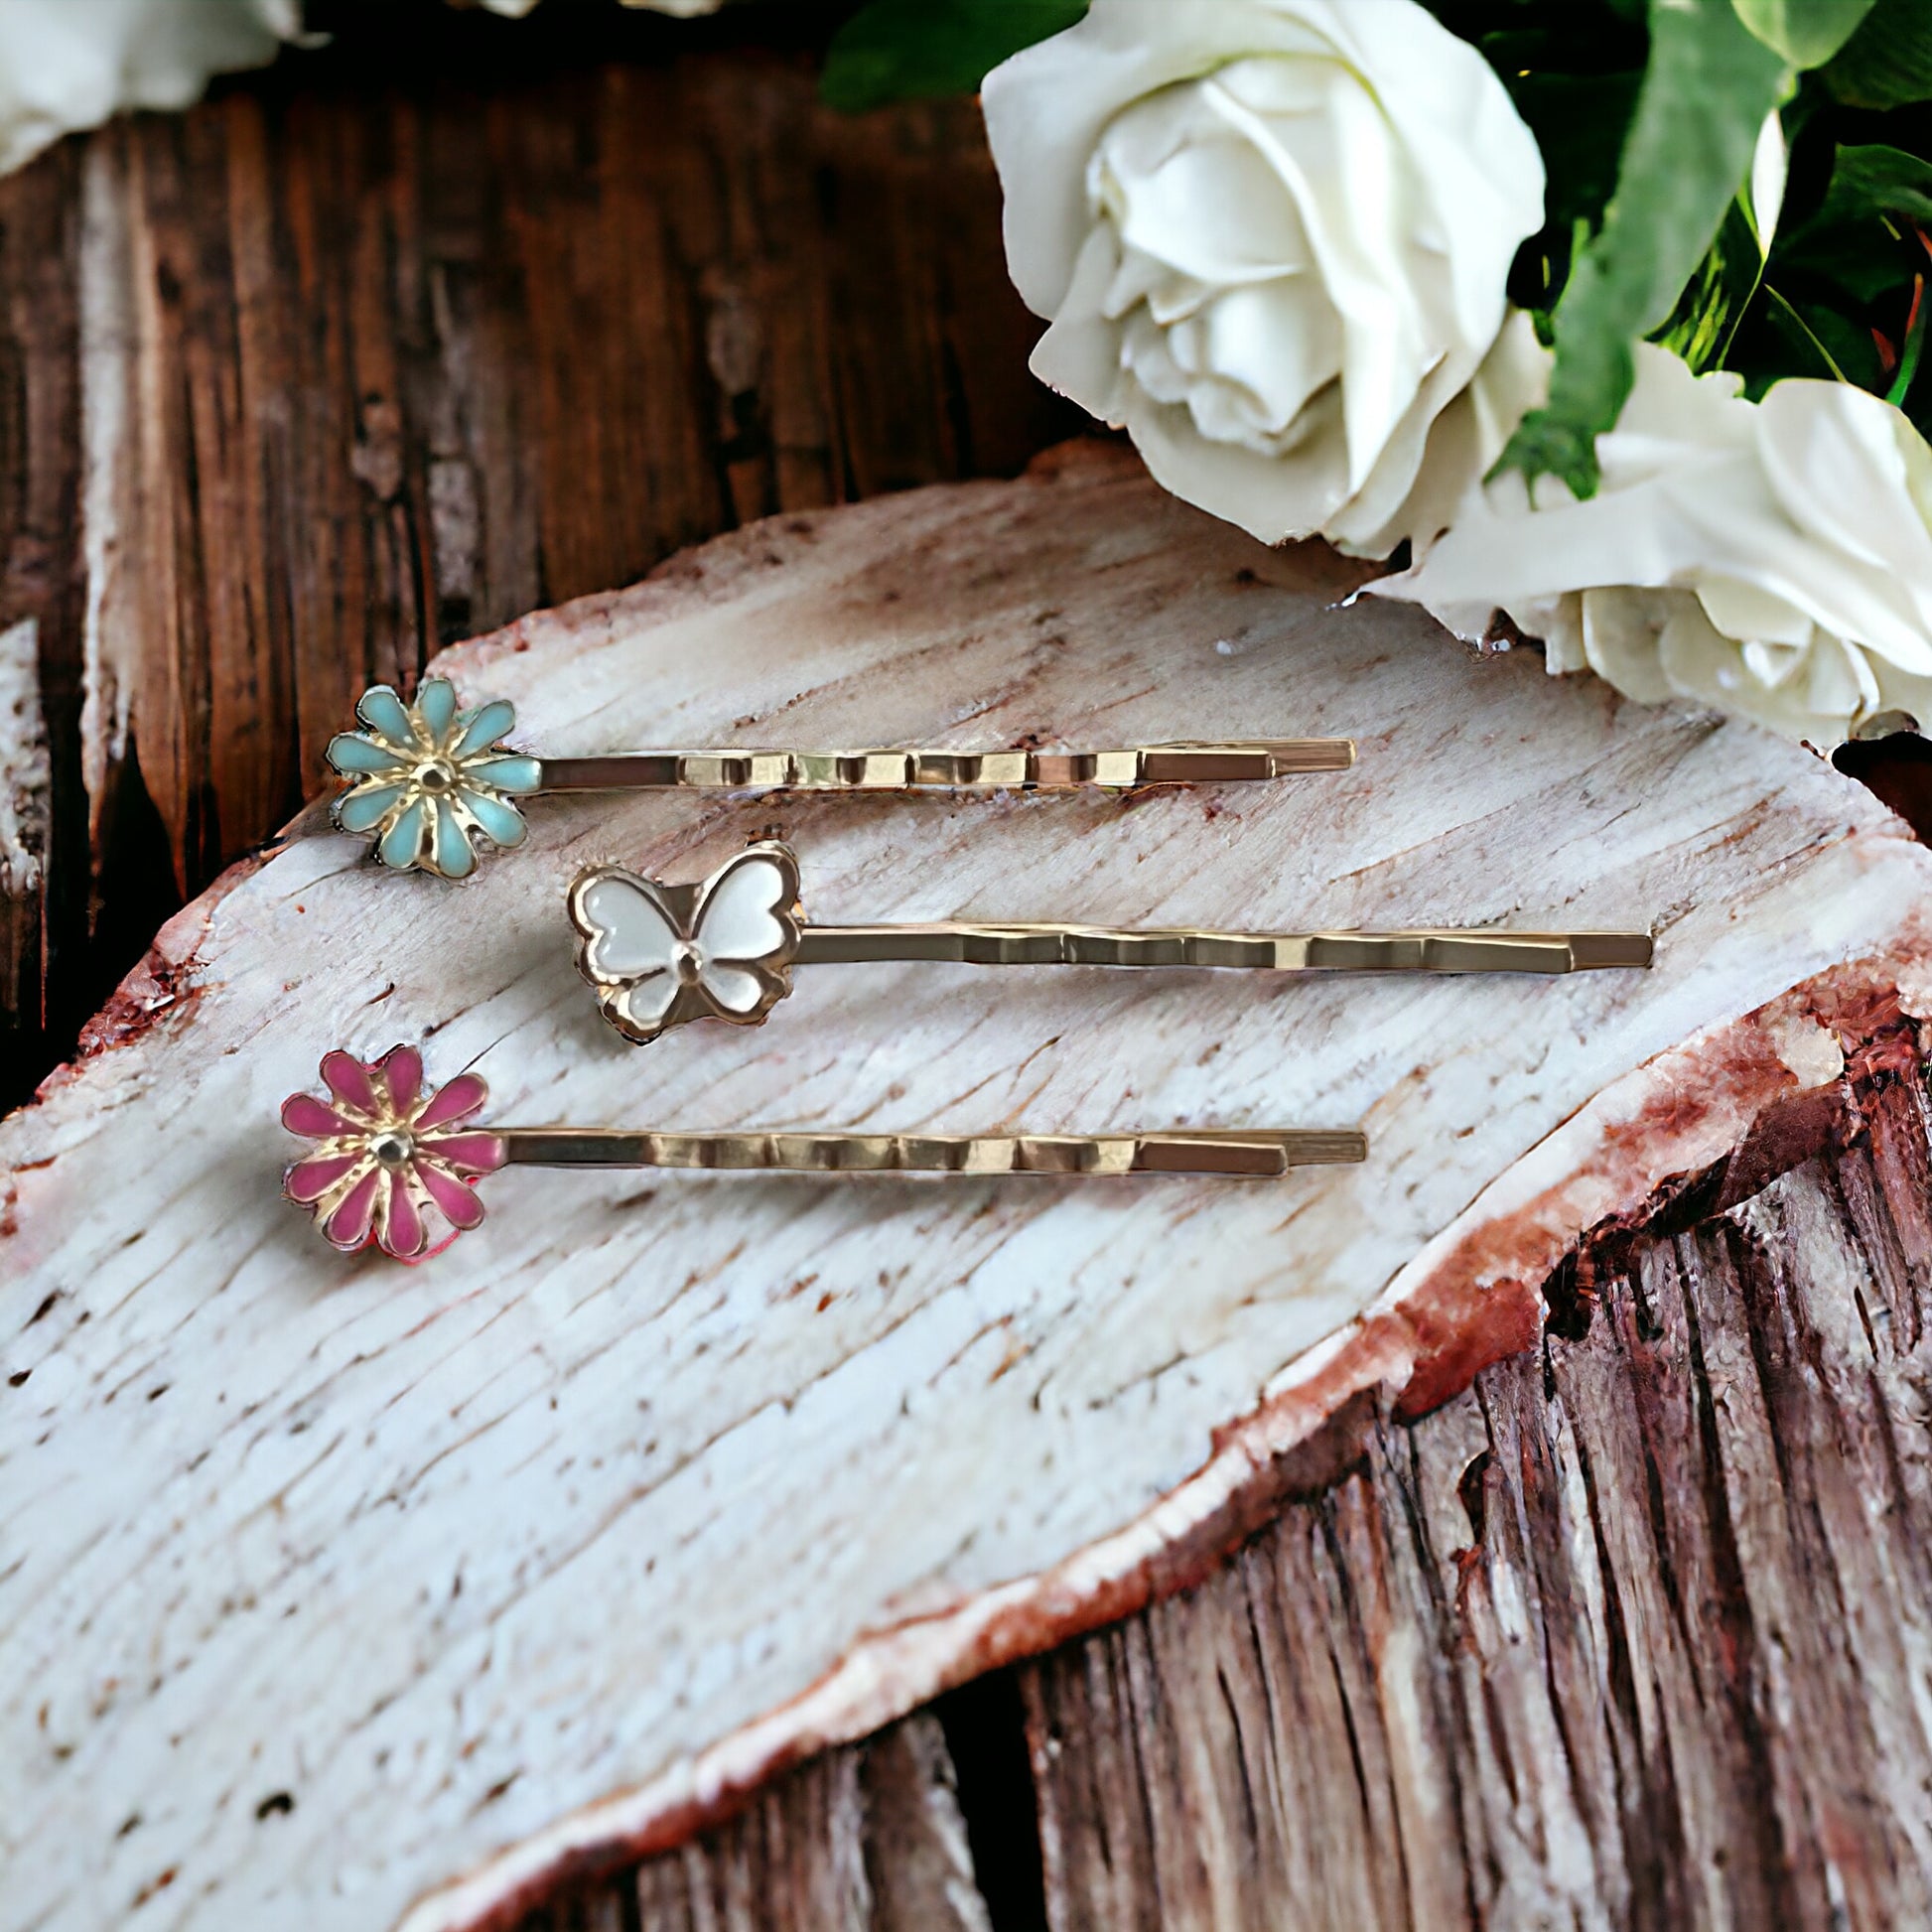 White Butterfly & Flower Hair Pin Set - Set of 3 Adorable Accessories for Hair Styling